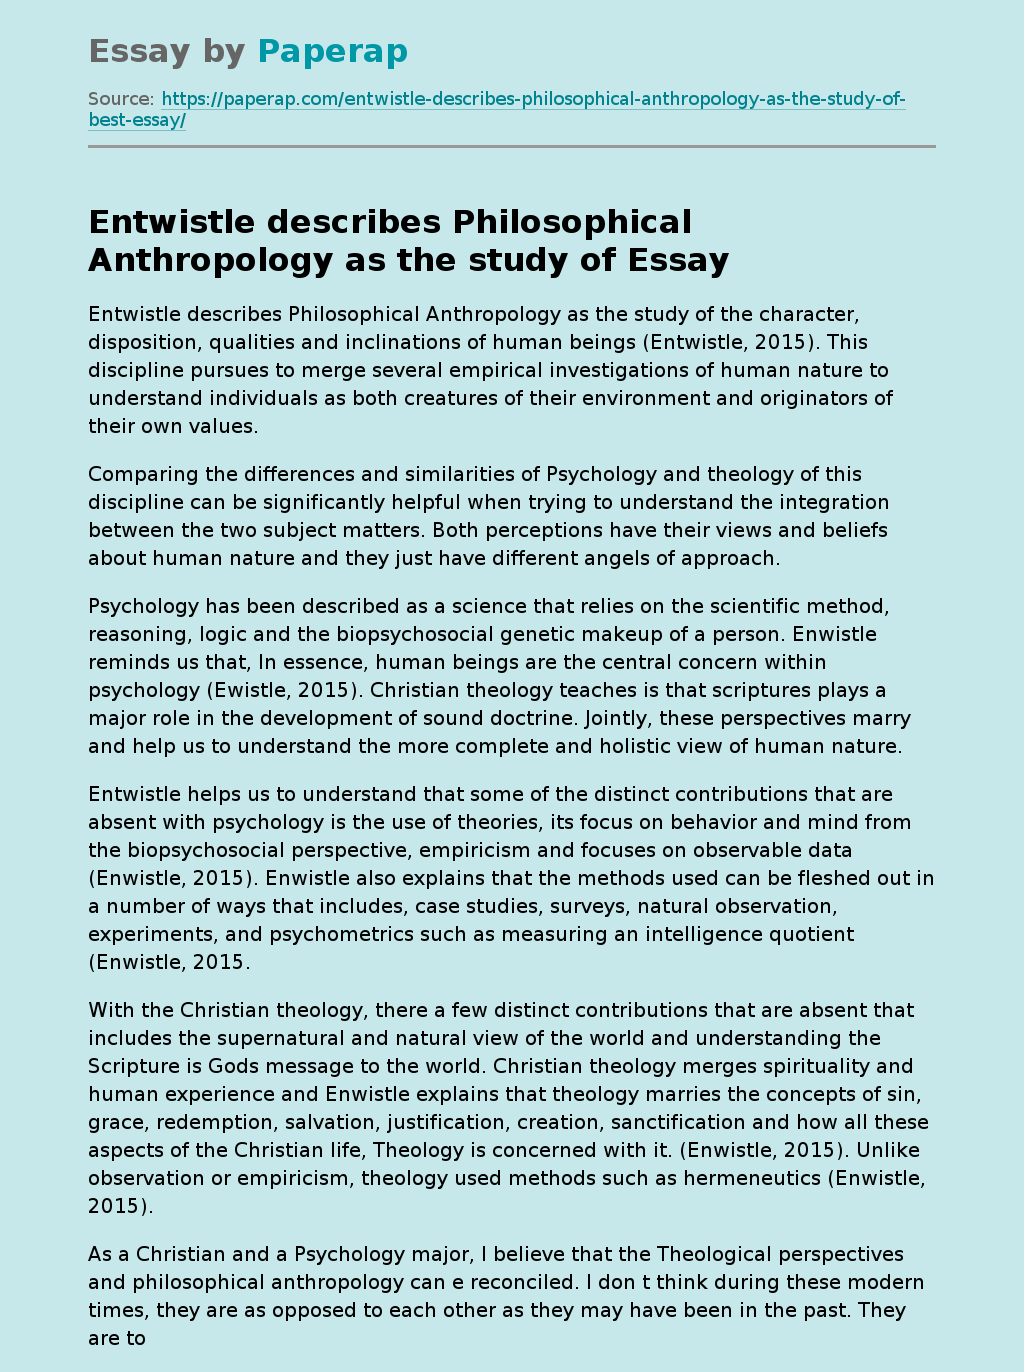 Entwistle describes Philosophical Anthropology as the study of